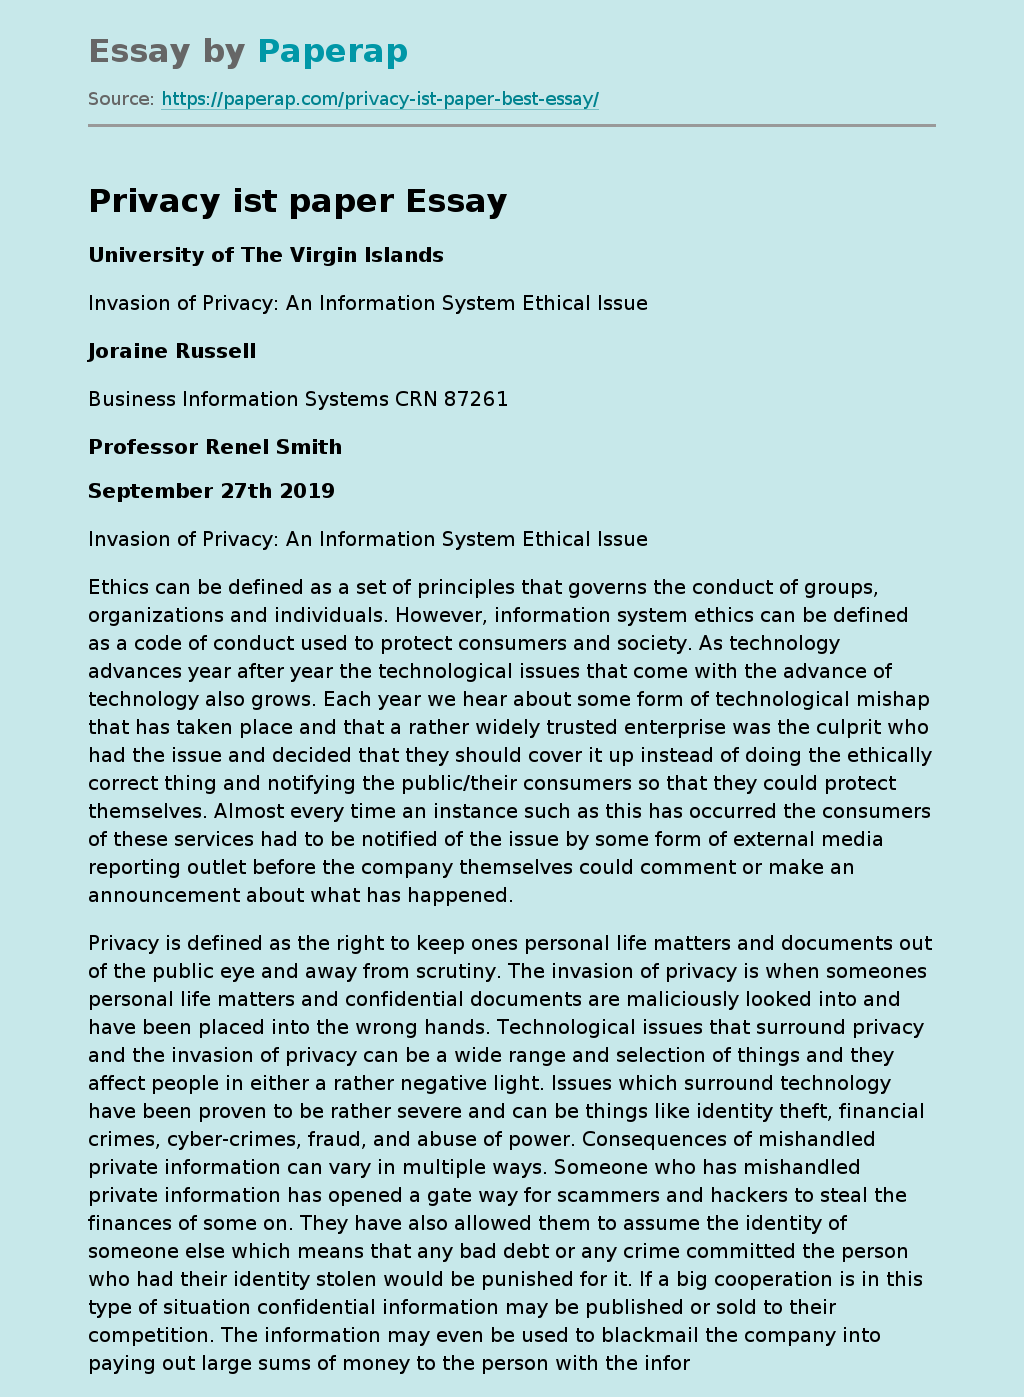 Privacy Ethics Overview